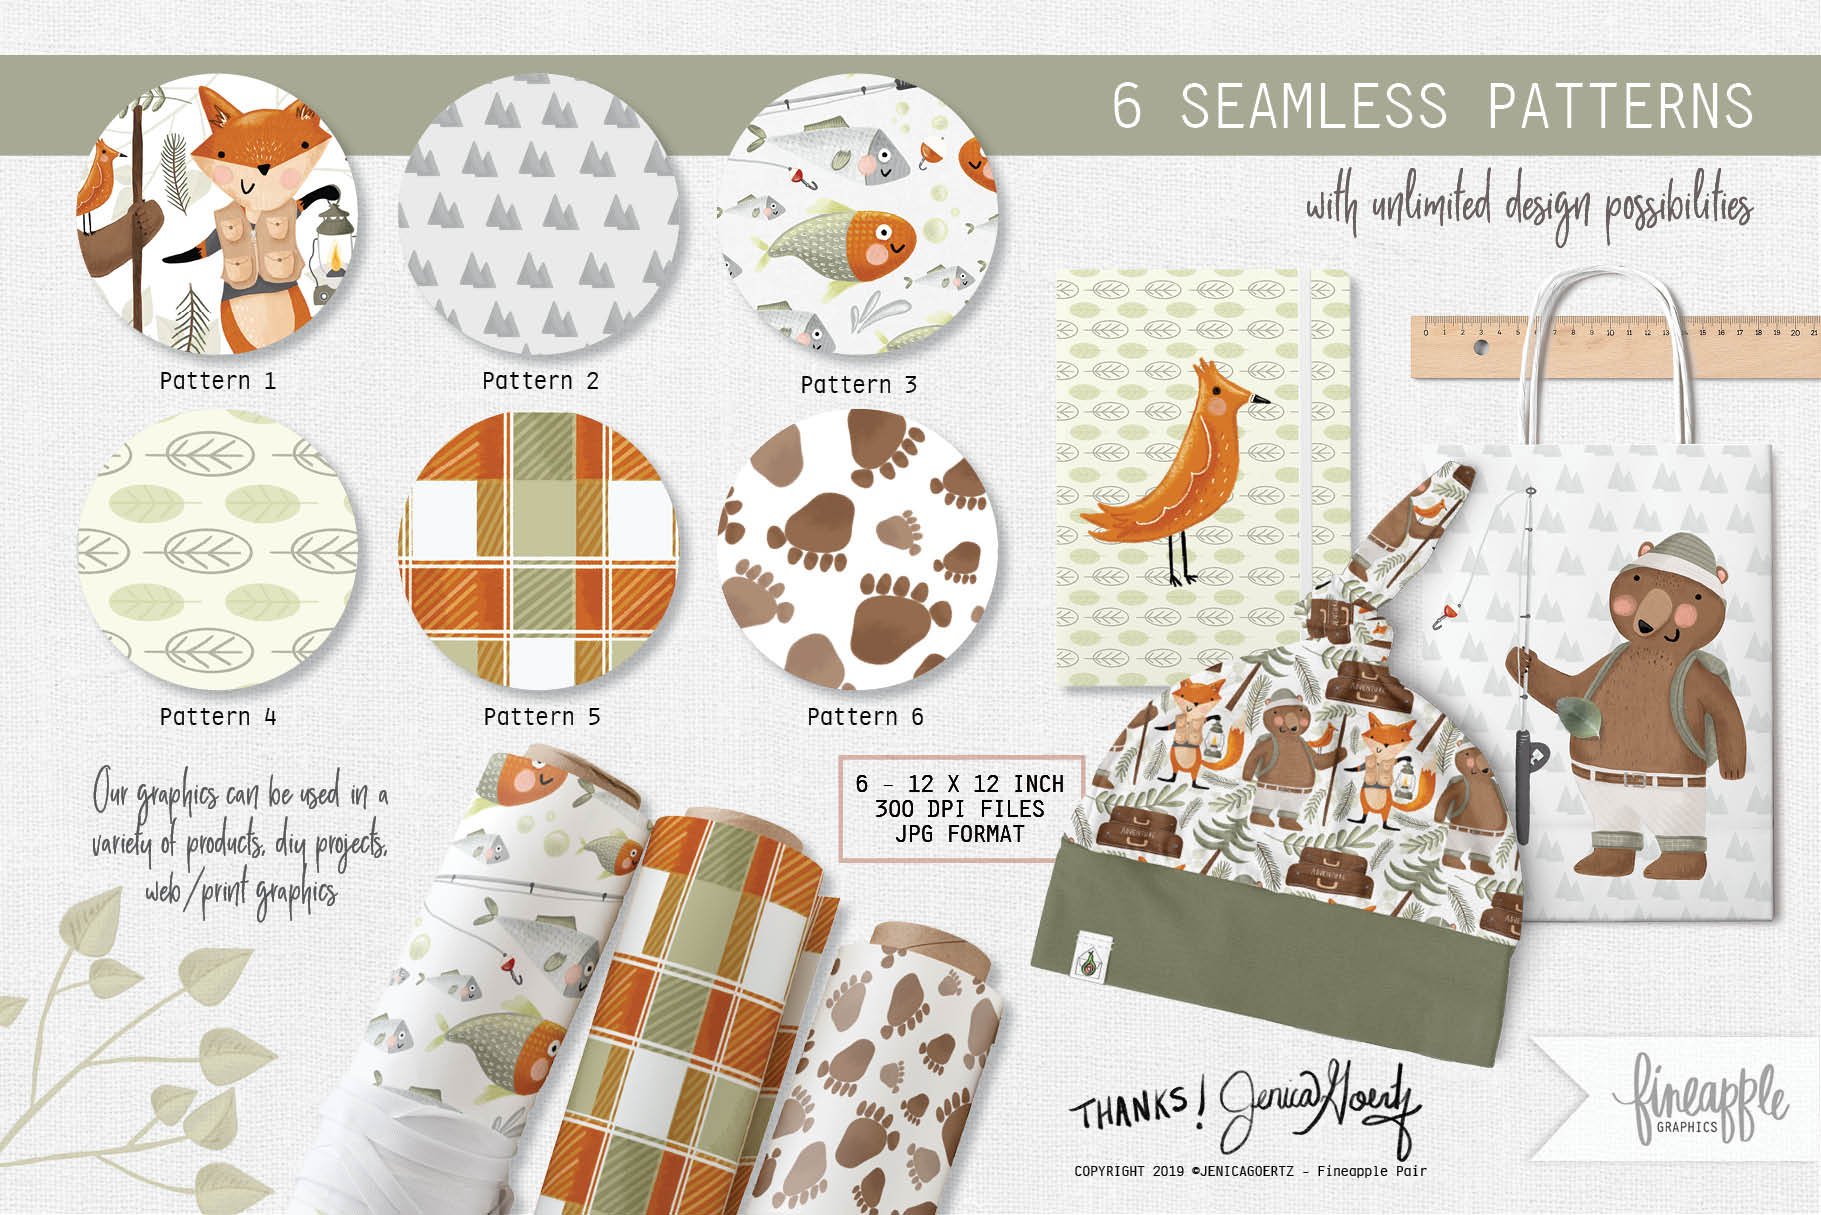 Cool camping prints in light colors and with different animals.